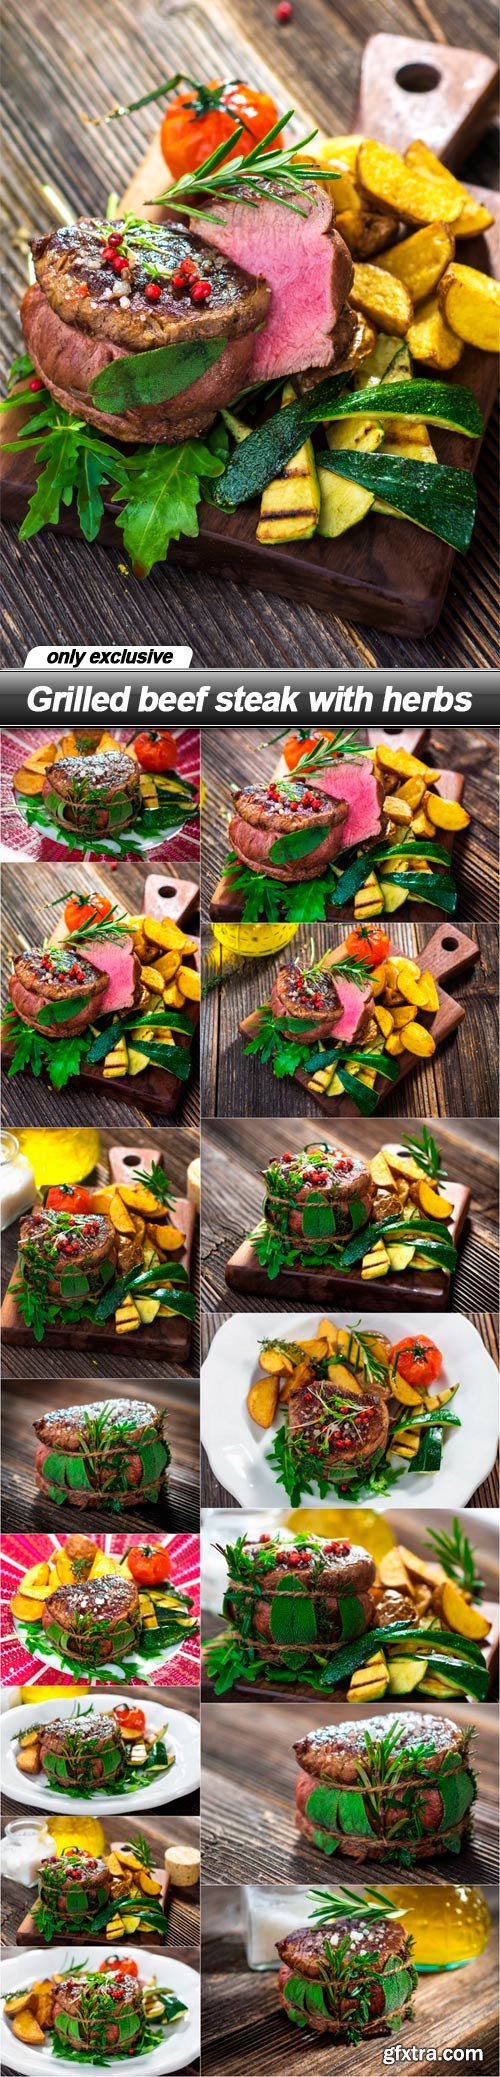 Grilled beef steak with herbs - 15 UHQ JPEG